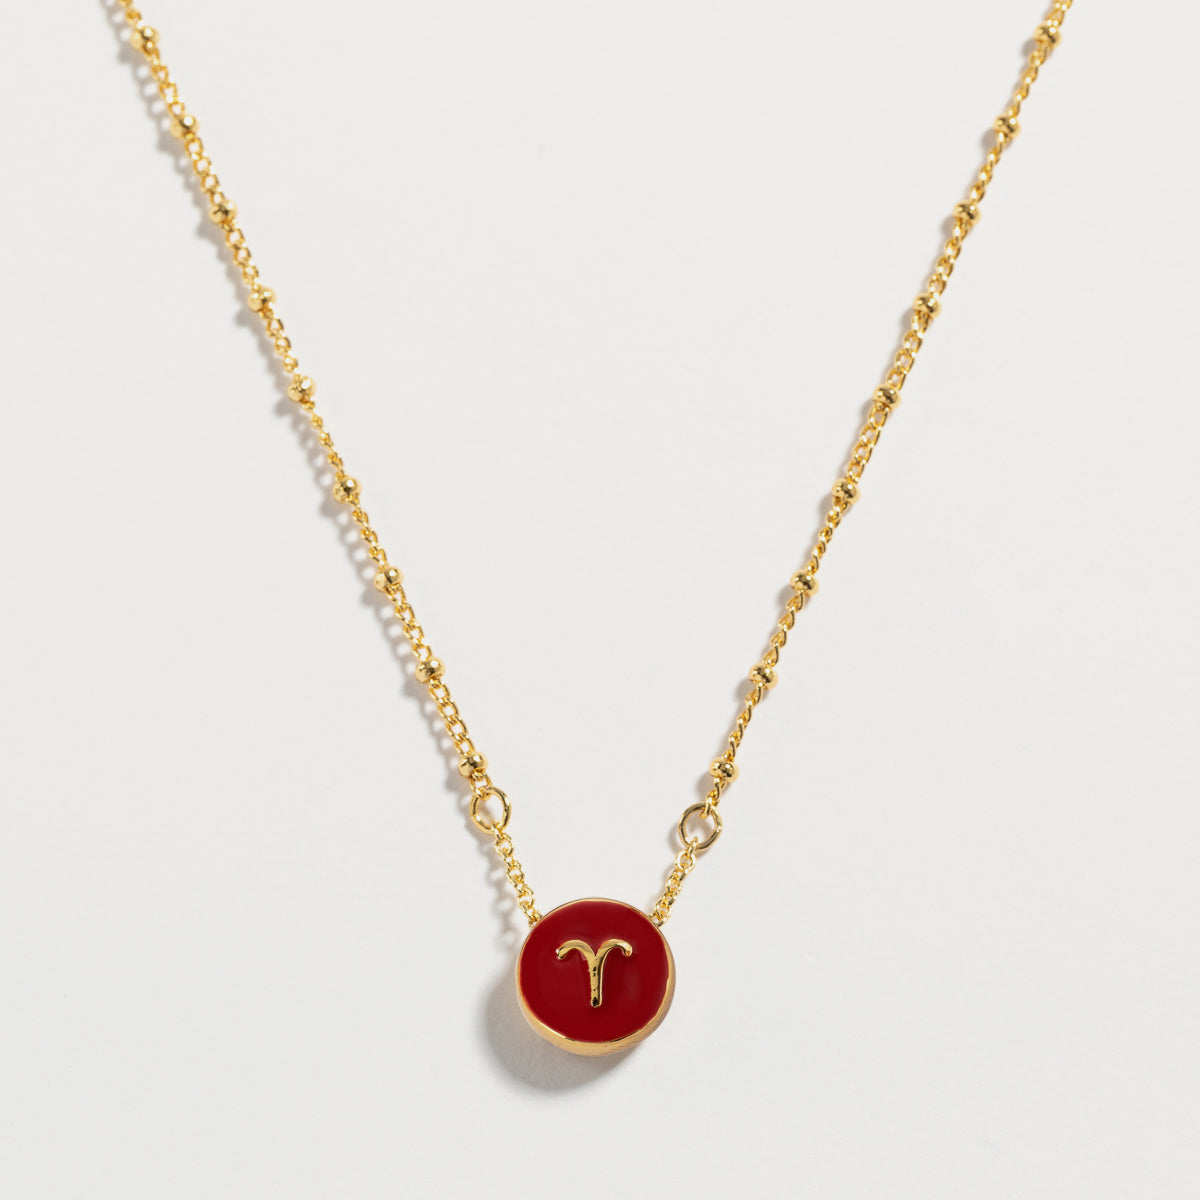 Astrological Sign Aries Necklace